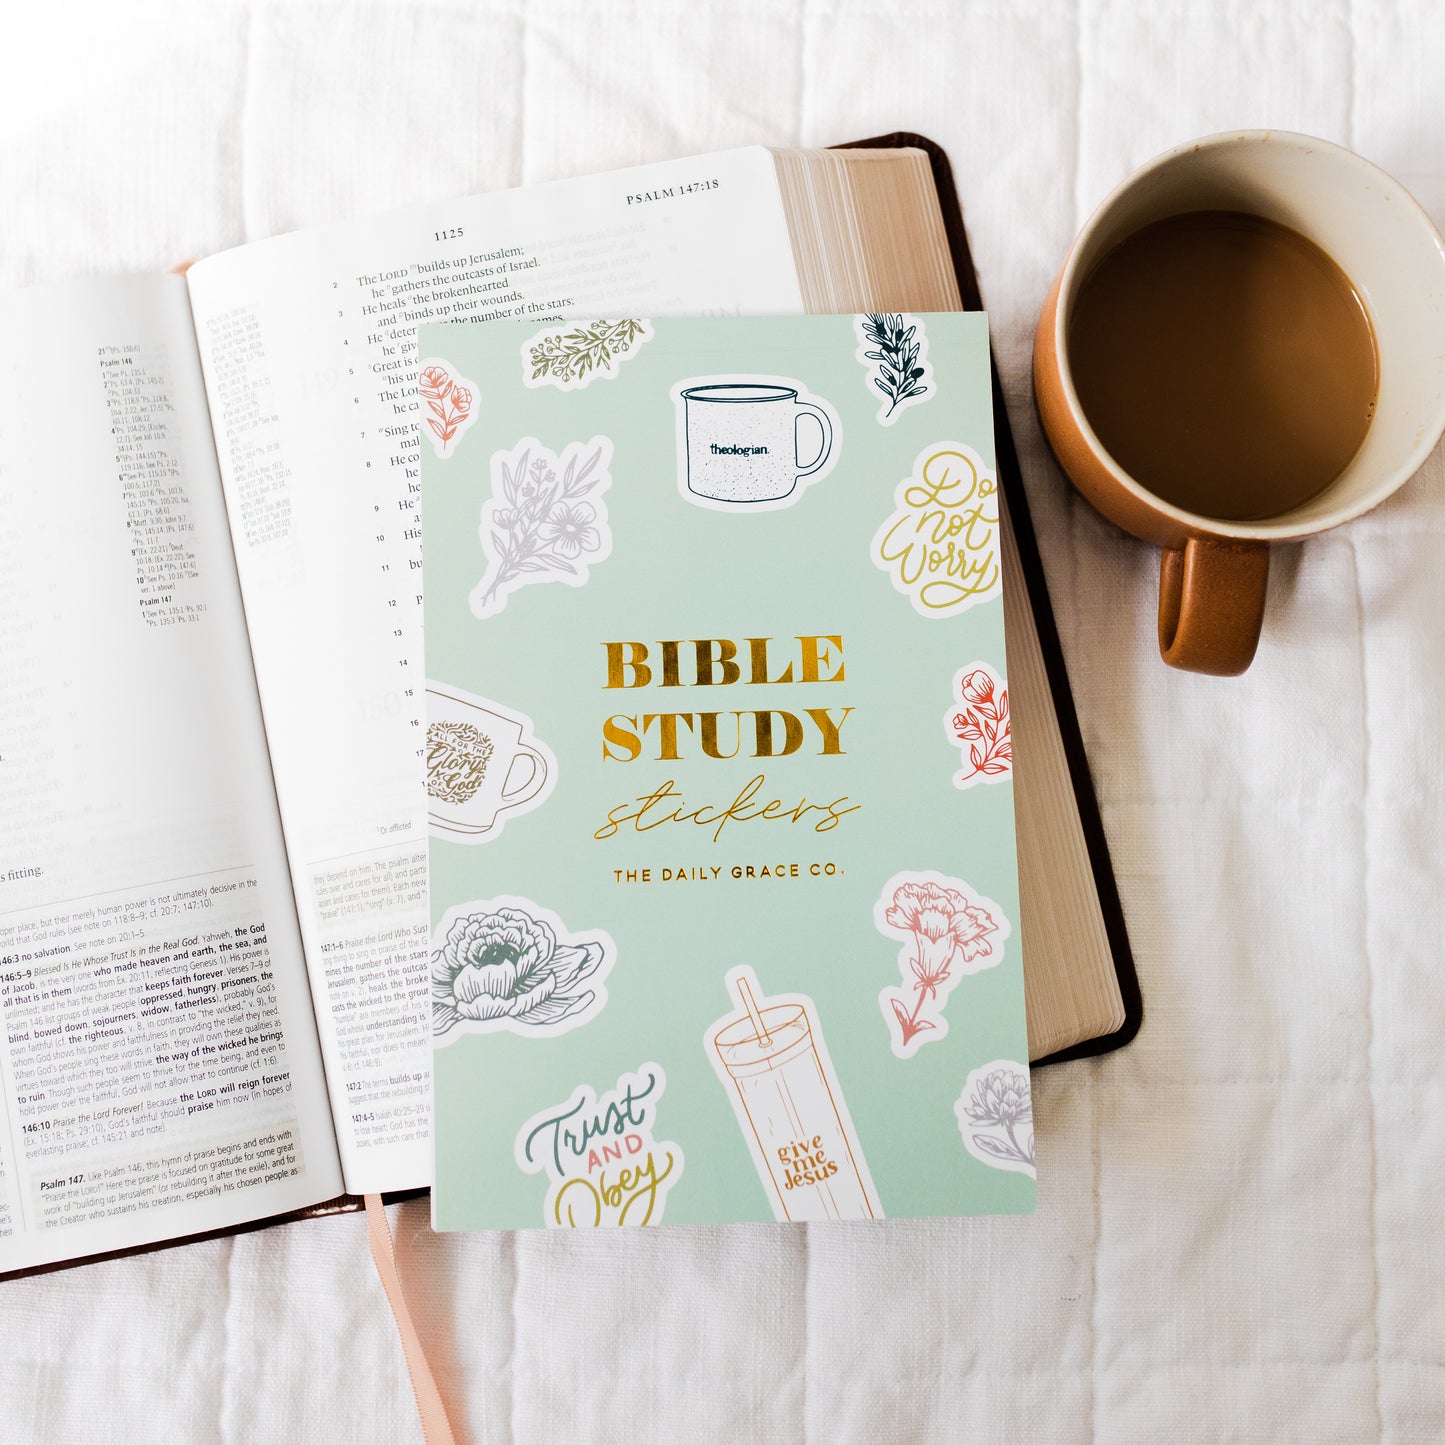 Bible Journaling Stickers | Inserts | Bible Study Vol. 1 pack